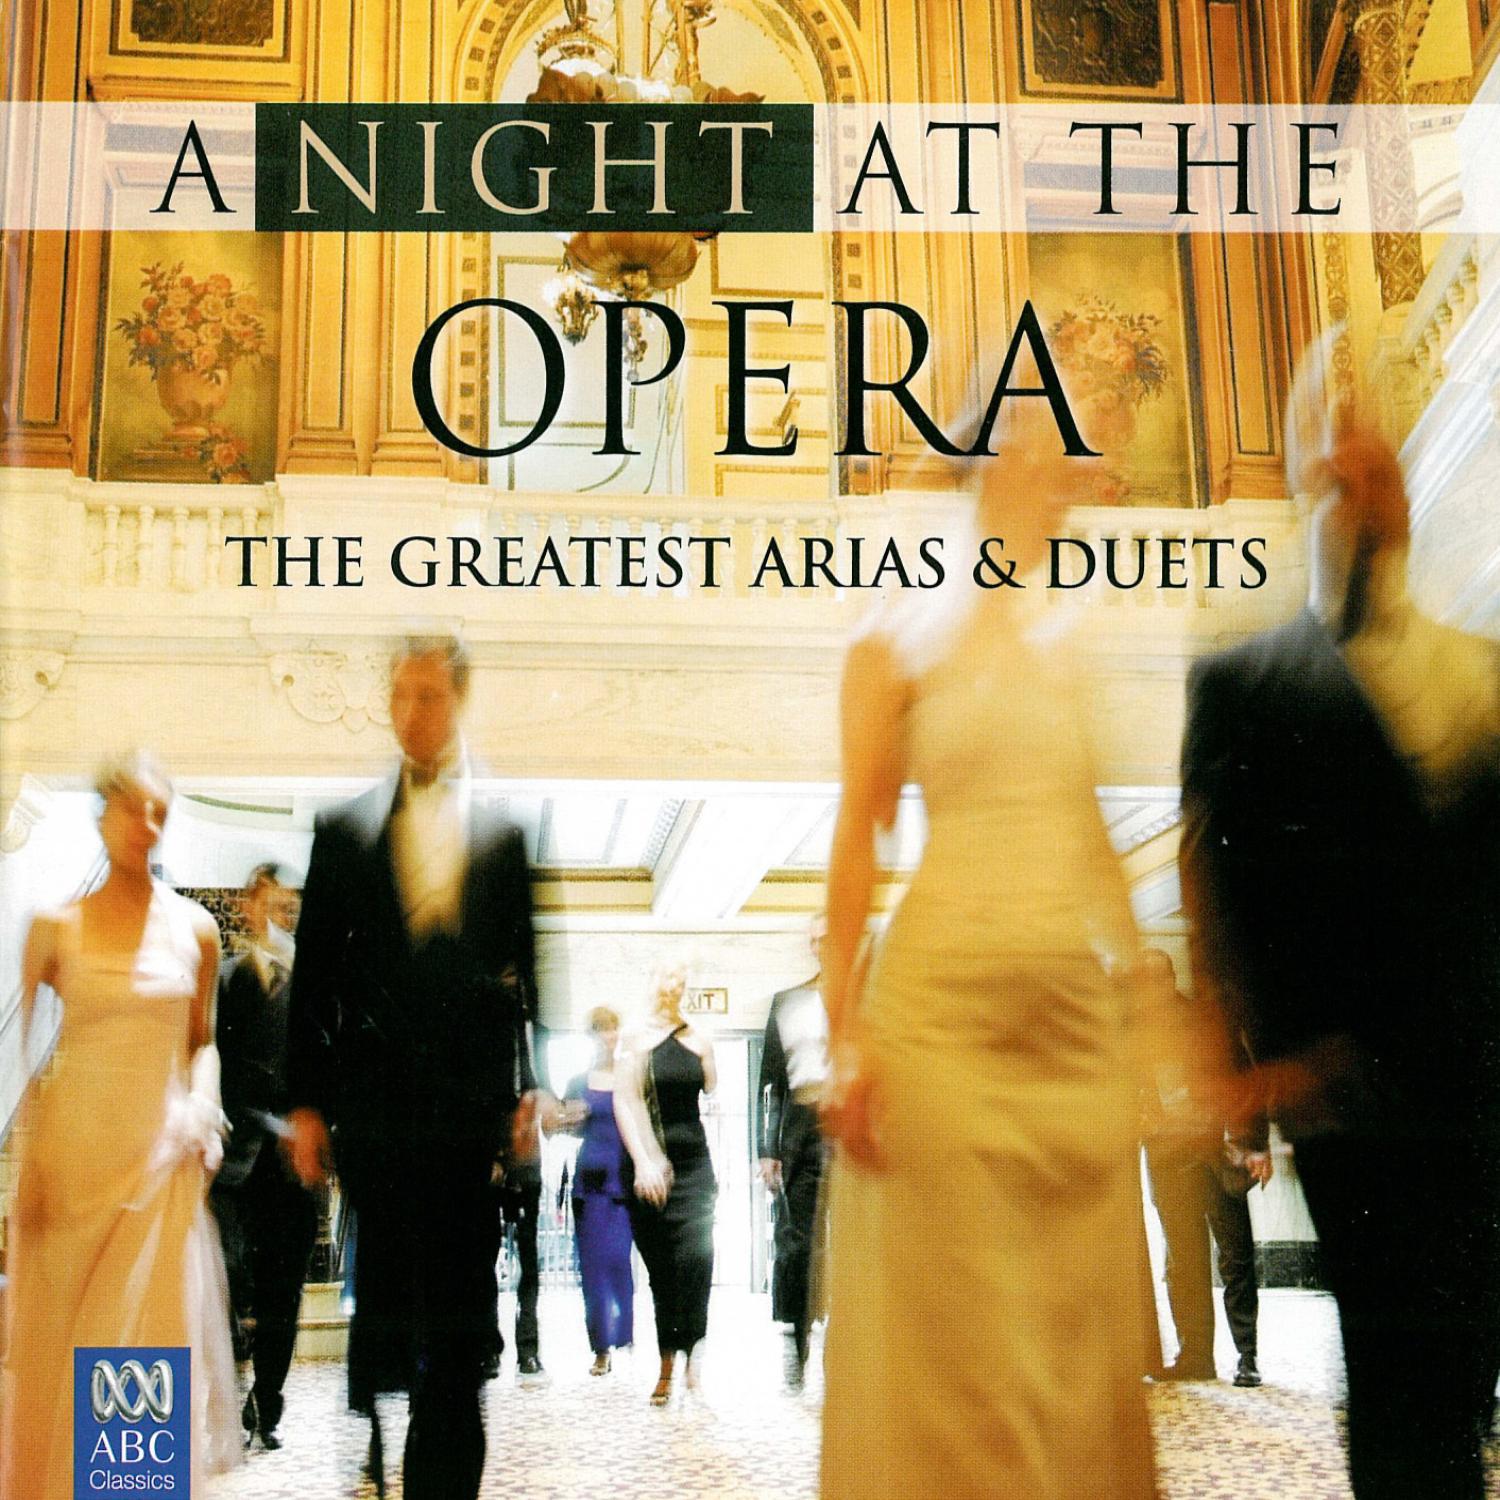 A Night At The Opera - The Greatest Arias & Duets